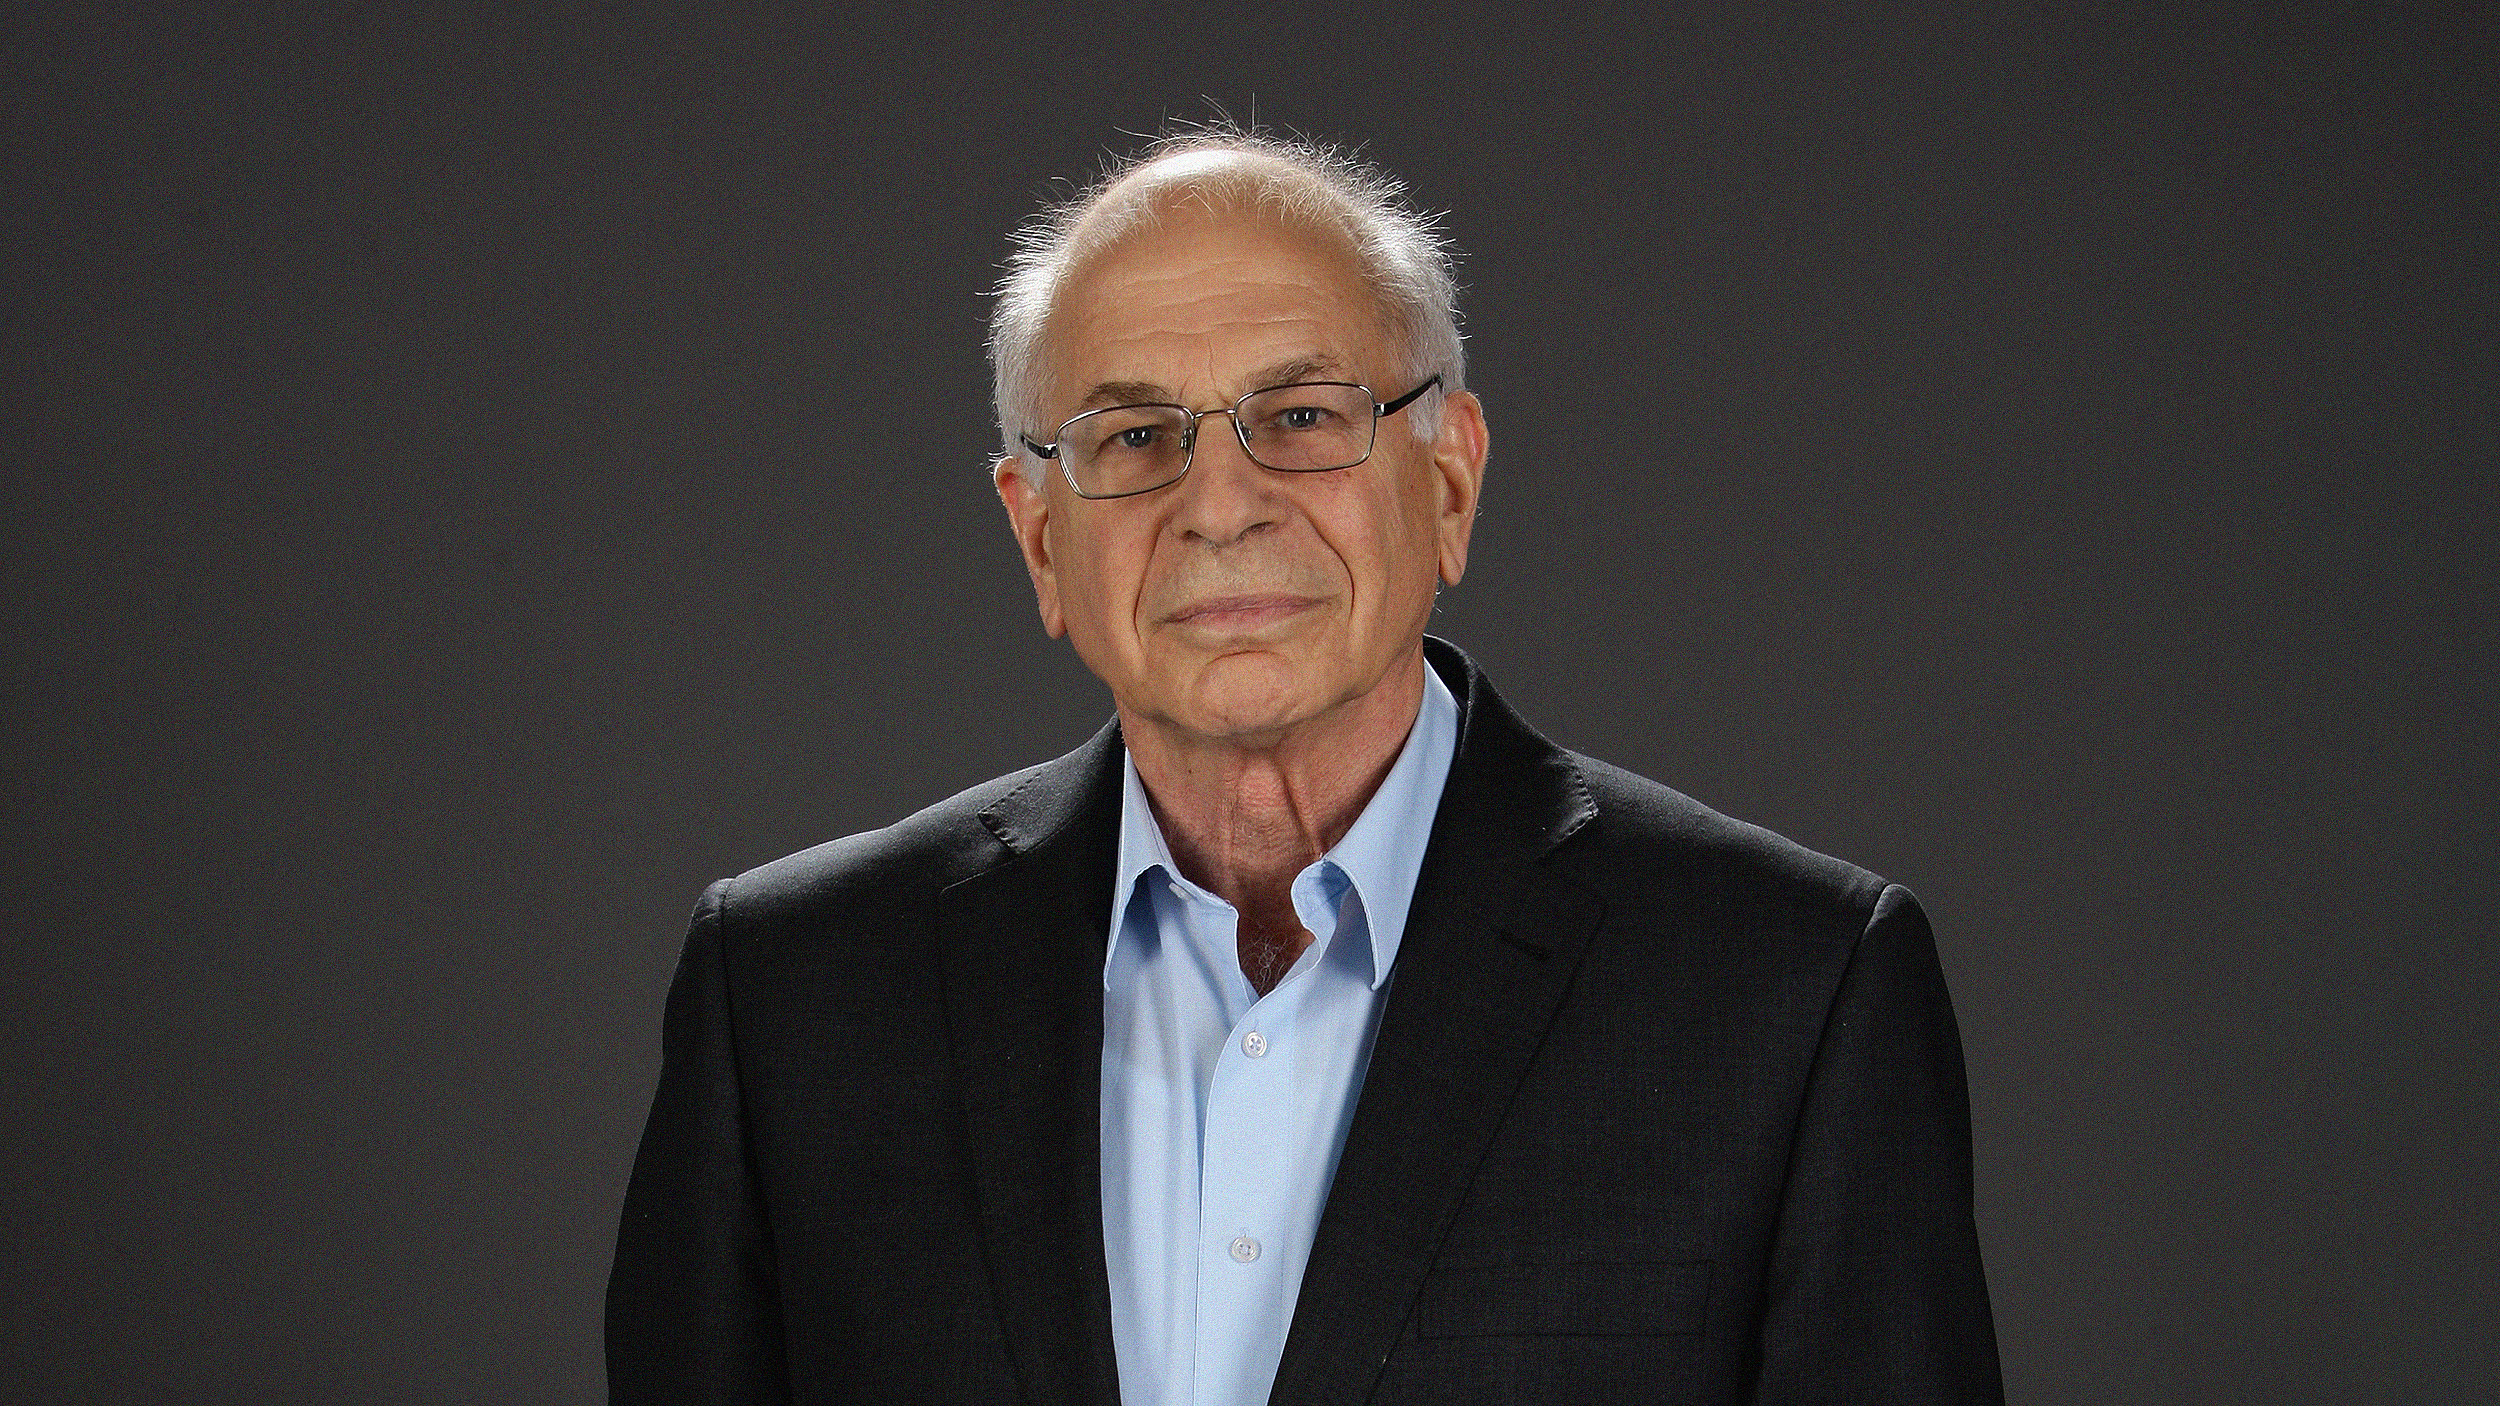 A senior man, Daniel Kahneman, with glasses, wearing a dark suit and a blue shirt, standing against a gray background.